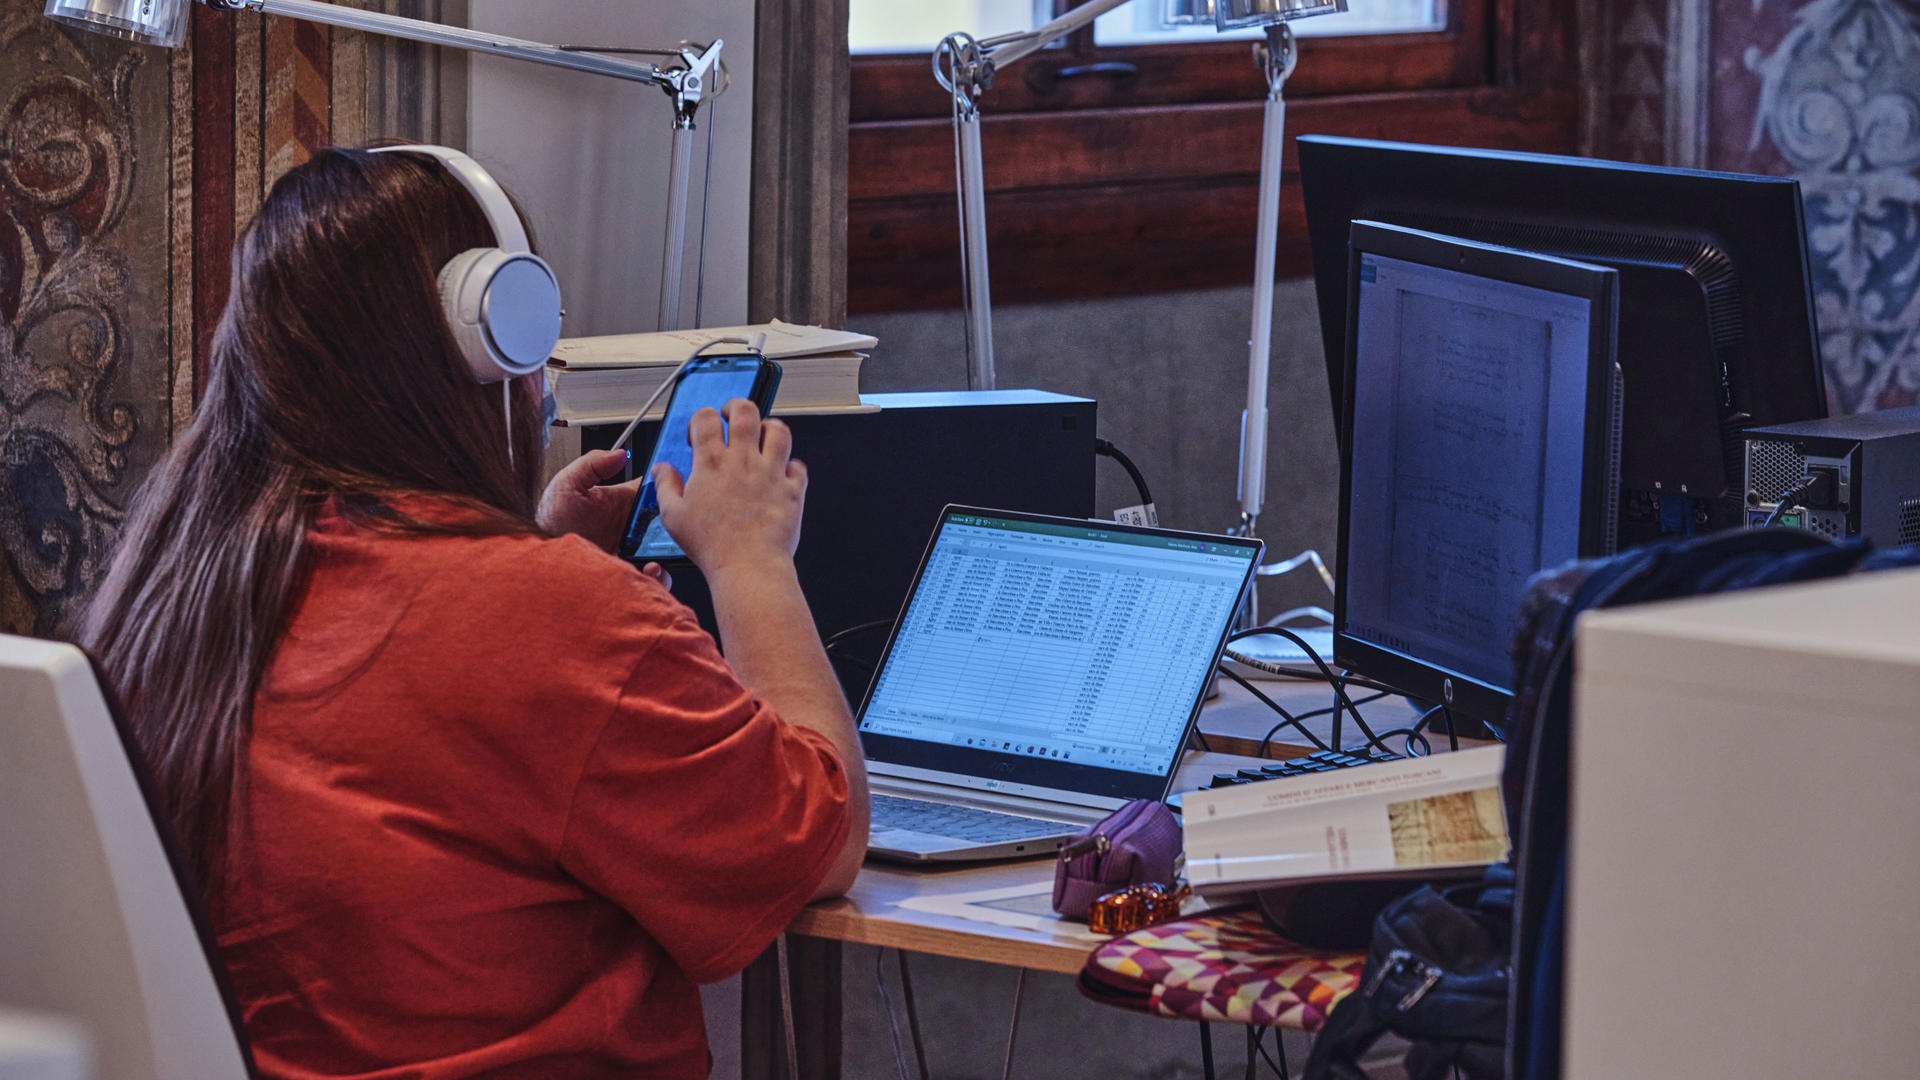 Researcher with headphones using a phone, laptop and PC. 